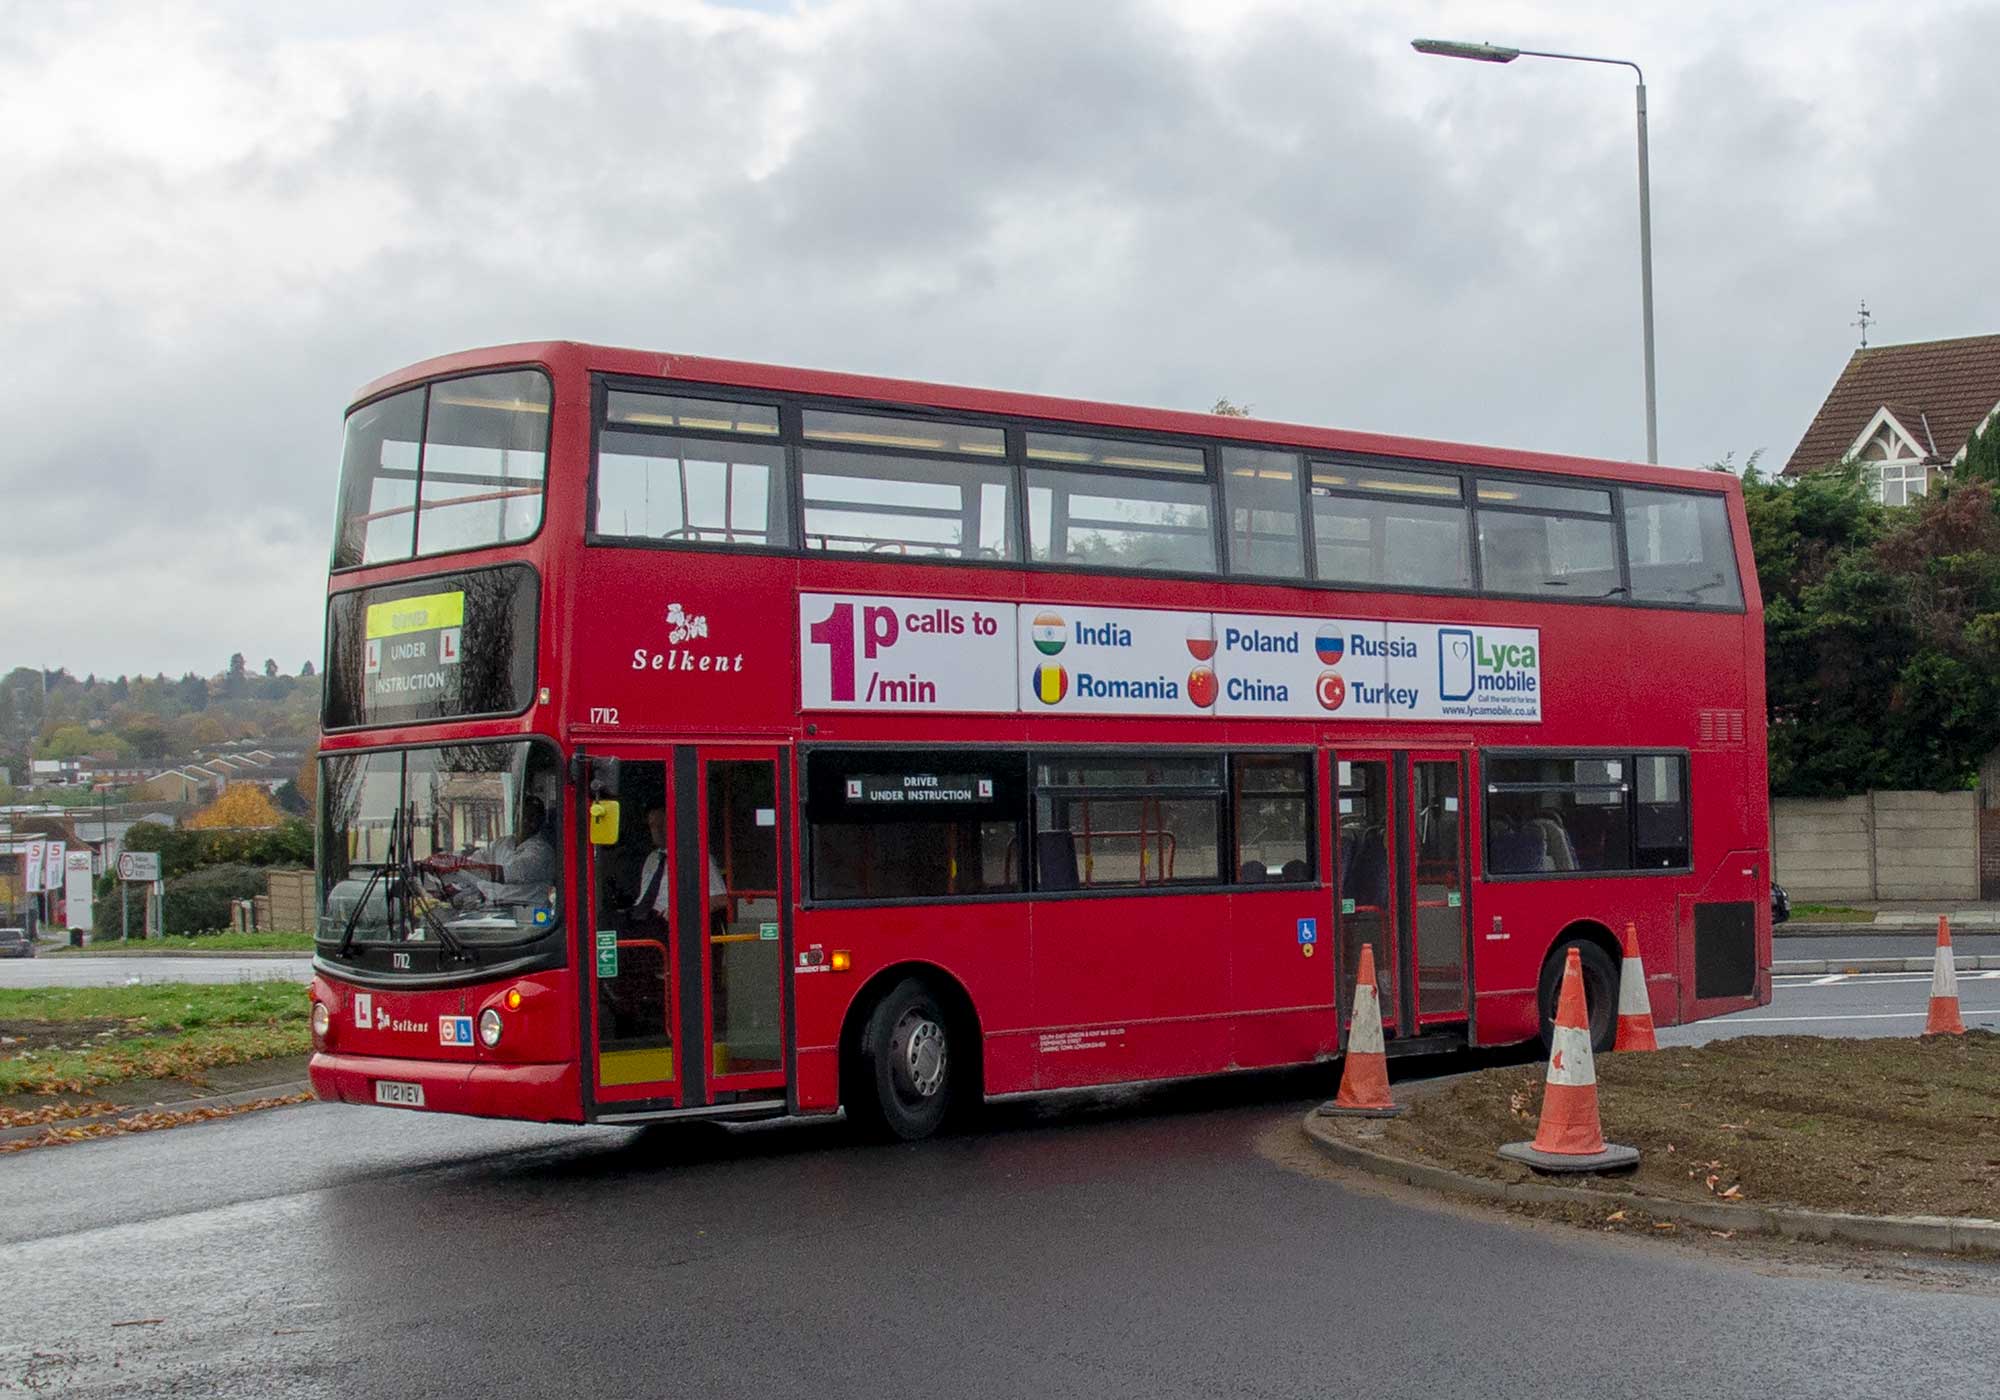 Bus attempts to get around Ruxley roundabout